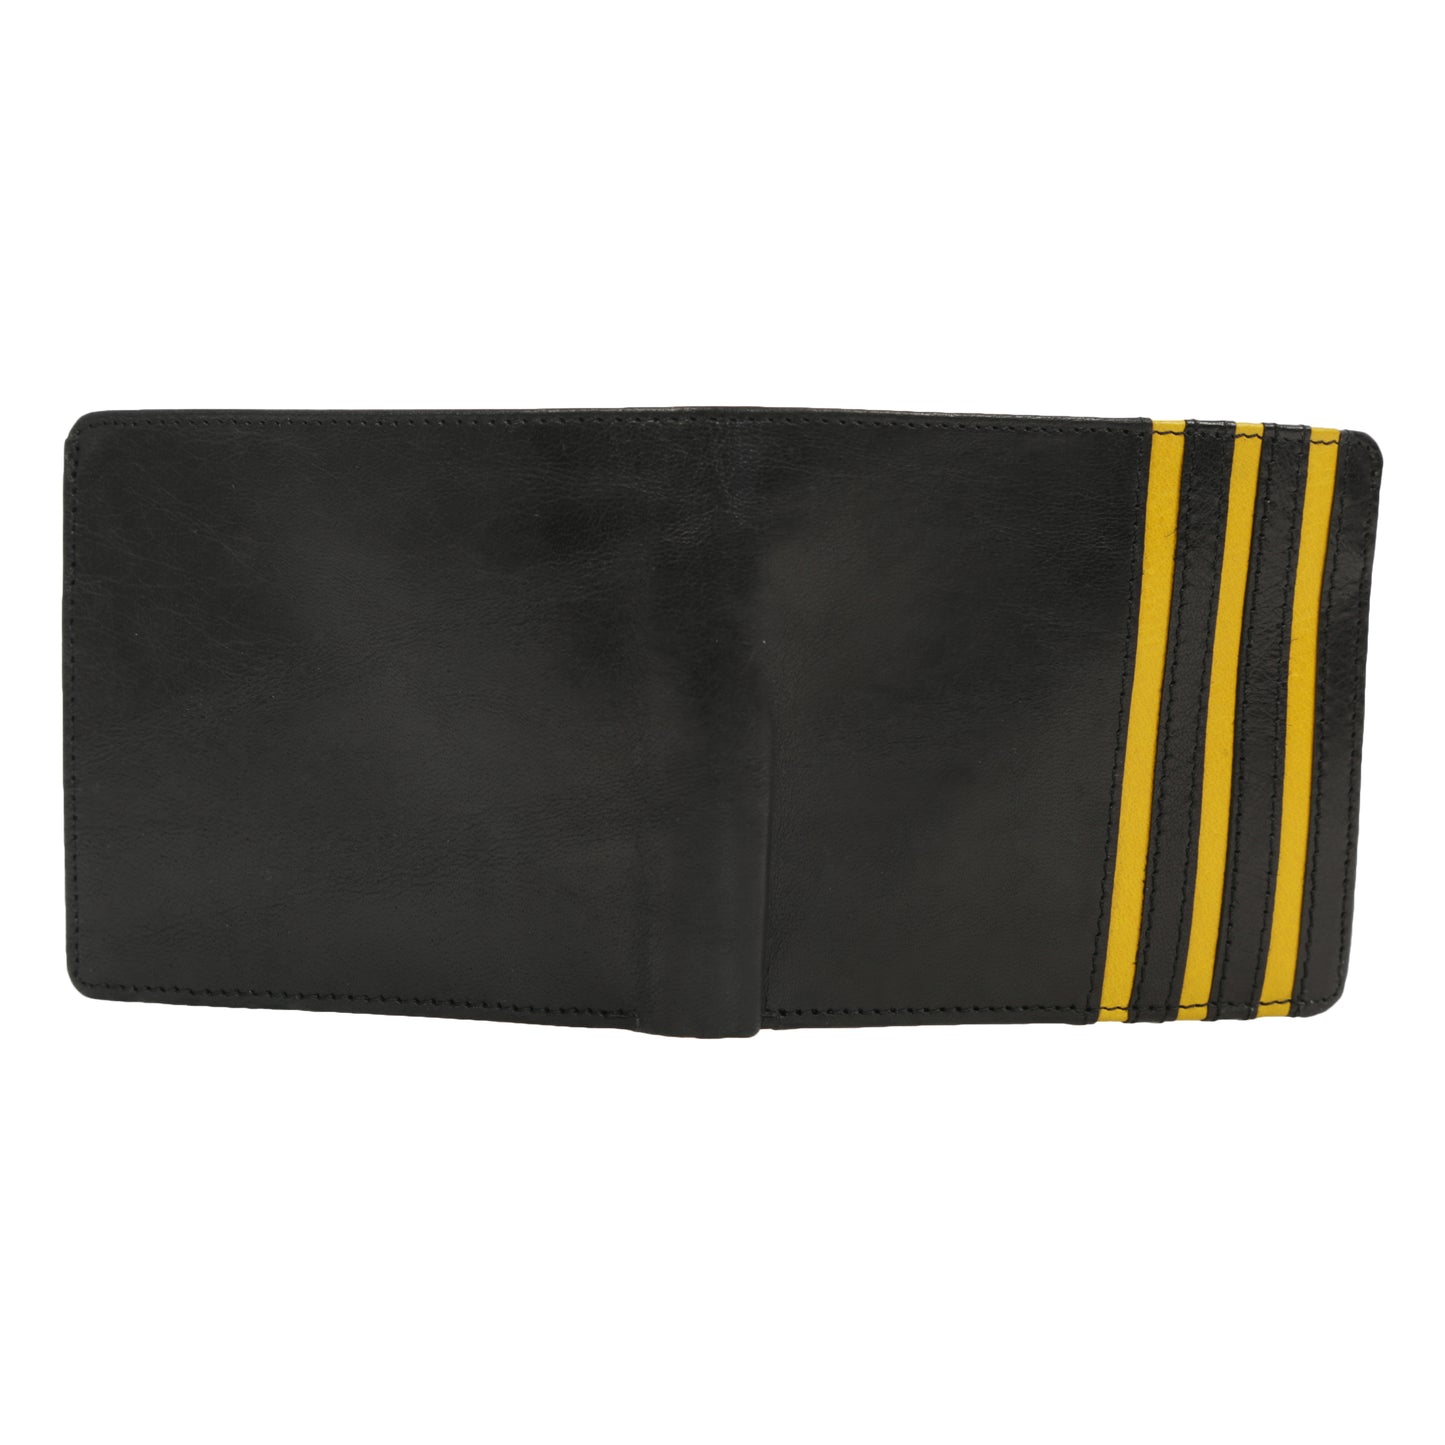 Pilot's Wallet Three stripes by Northman+ : The First officer wallet